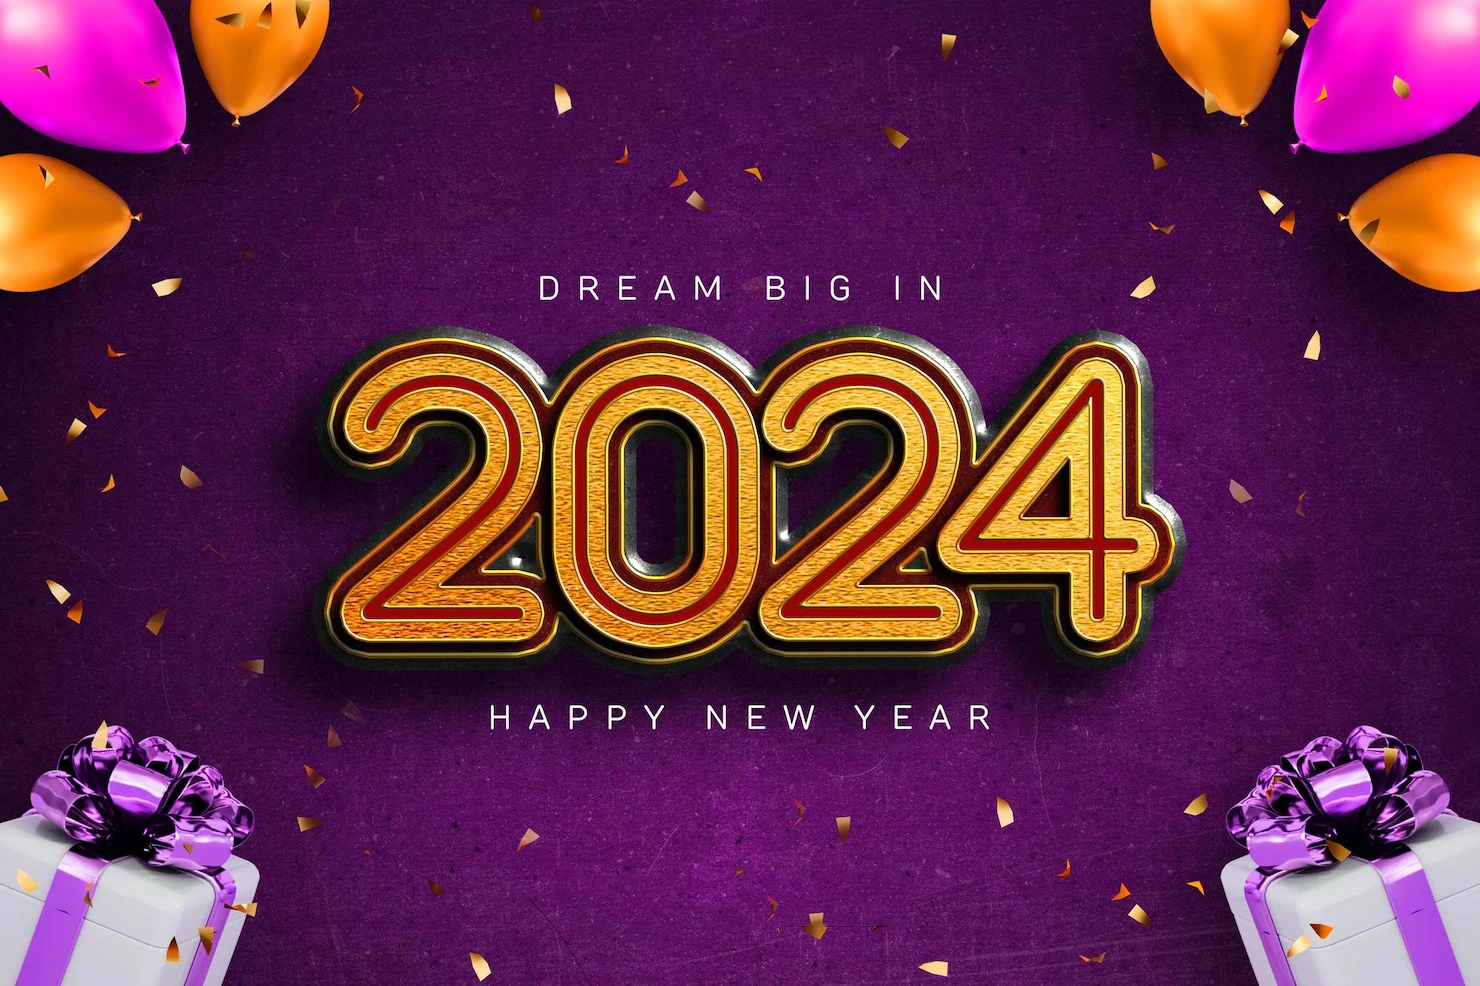 Happy new year banner with realistic 3d balloons golden text background